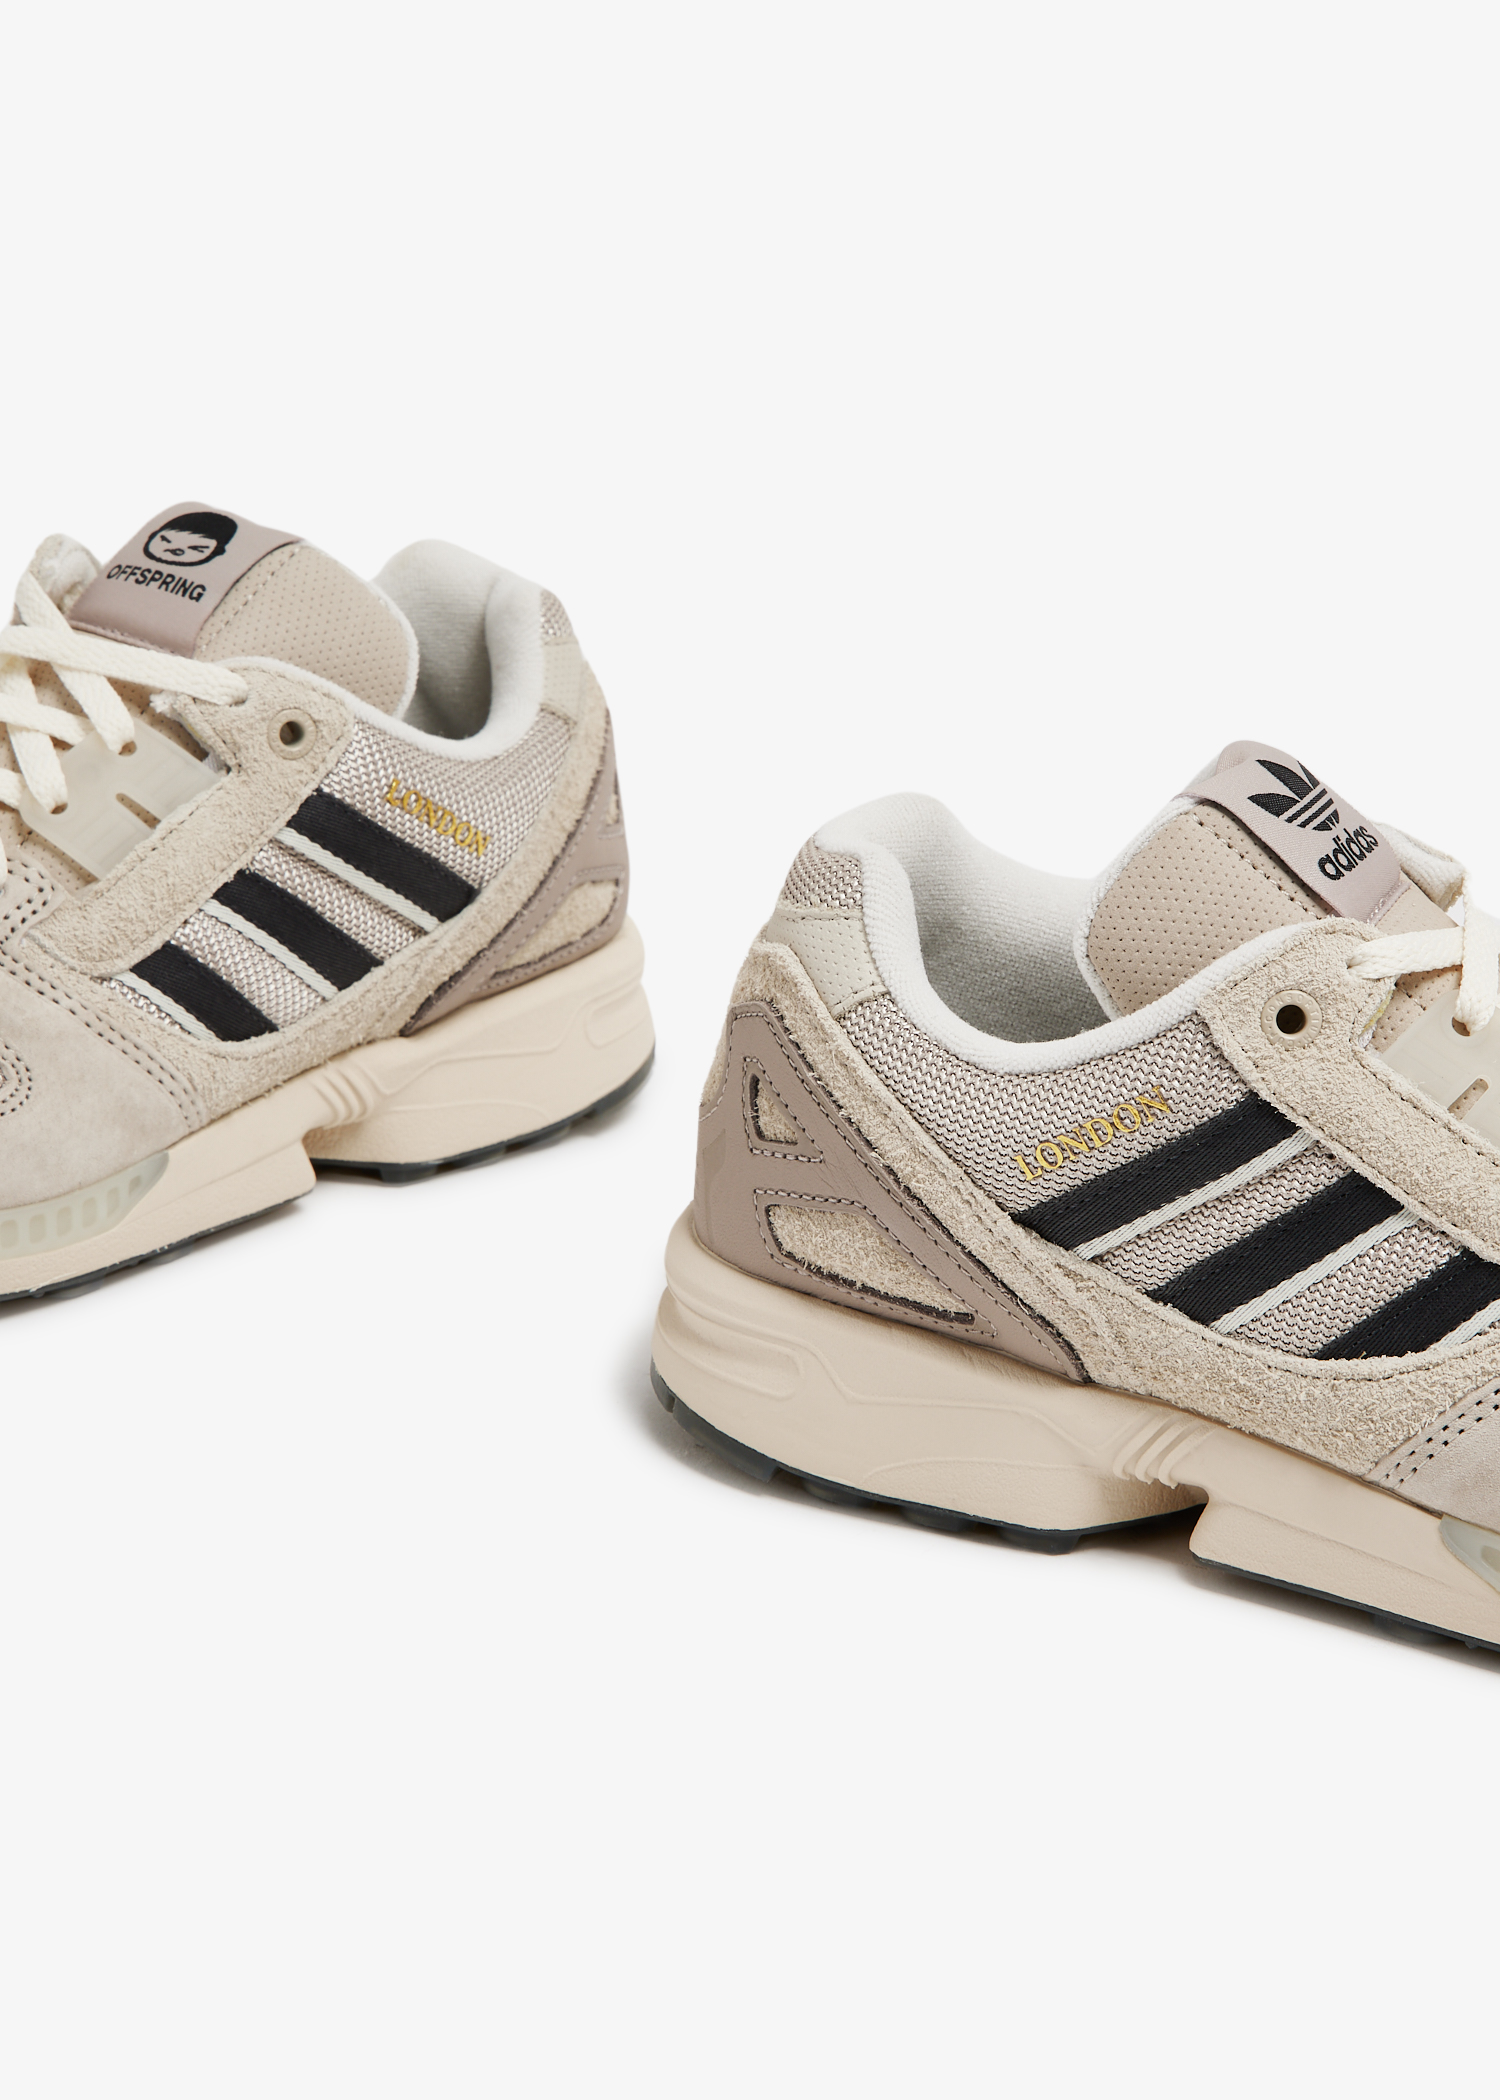 Adidas x OFFSPRING ZX 8000 'Consortium Cup' sneakers for Men 